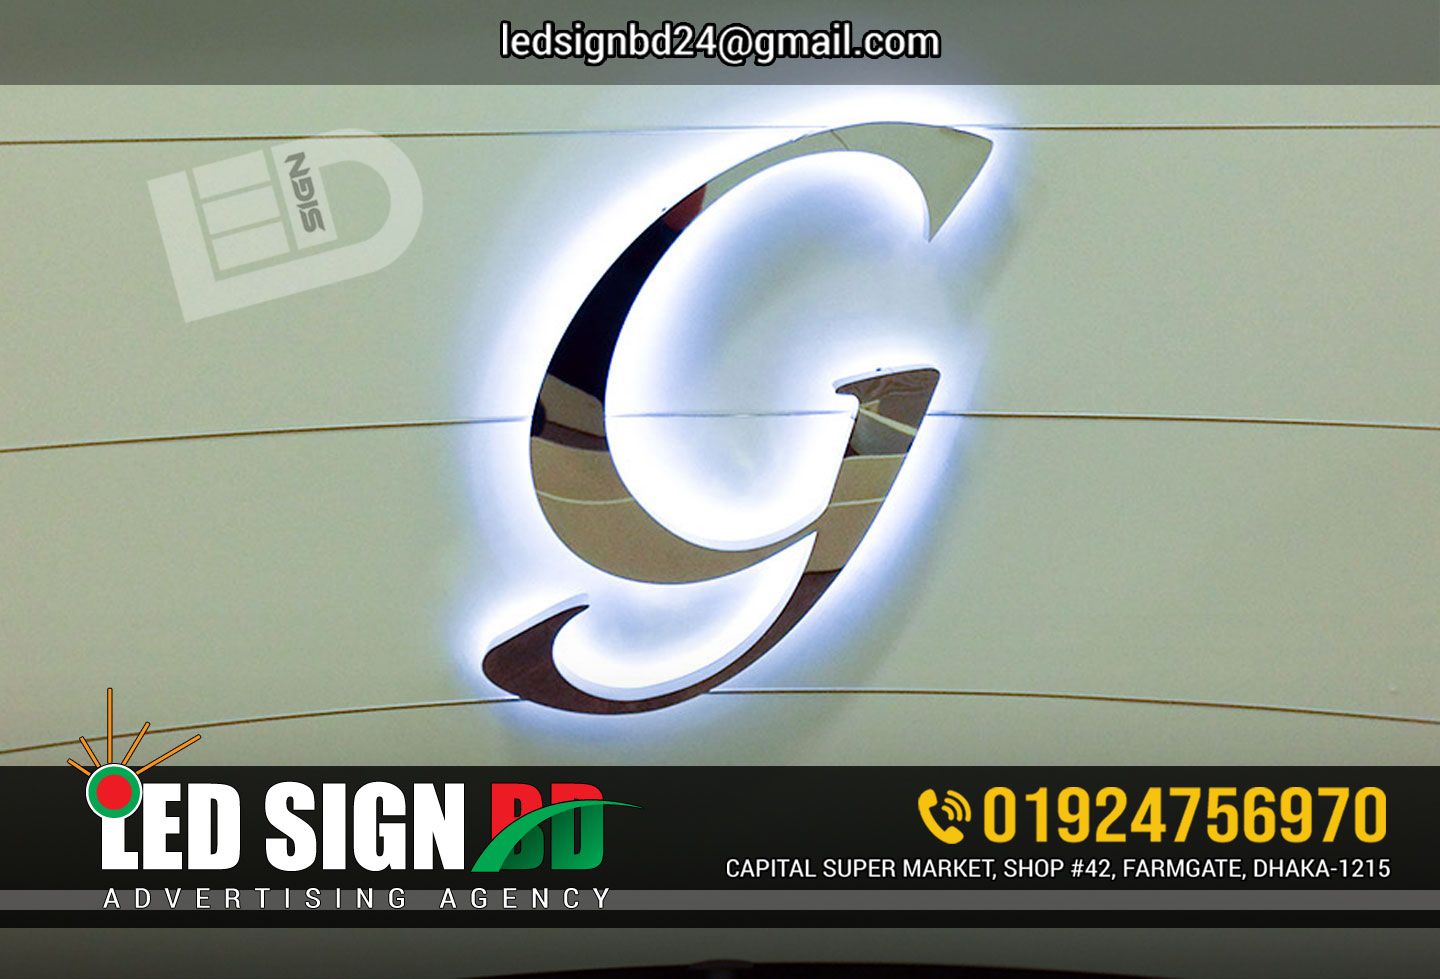 SS Top letter Signage, Best Neon Signage Agency in Dhaka Bangladesh